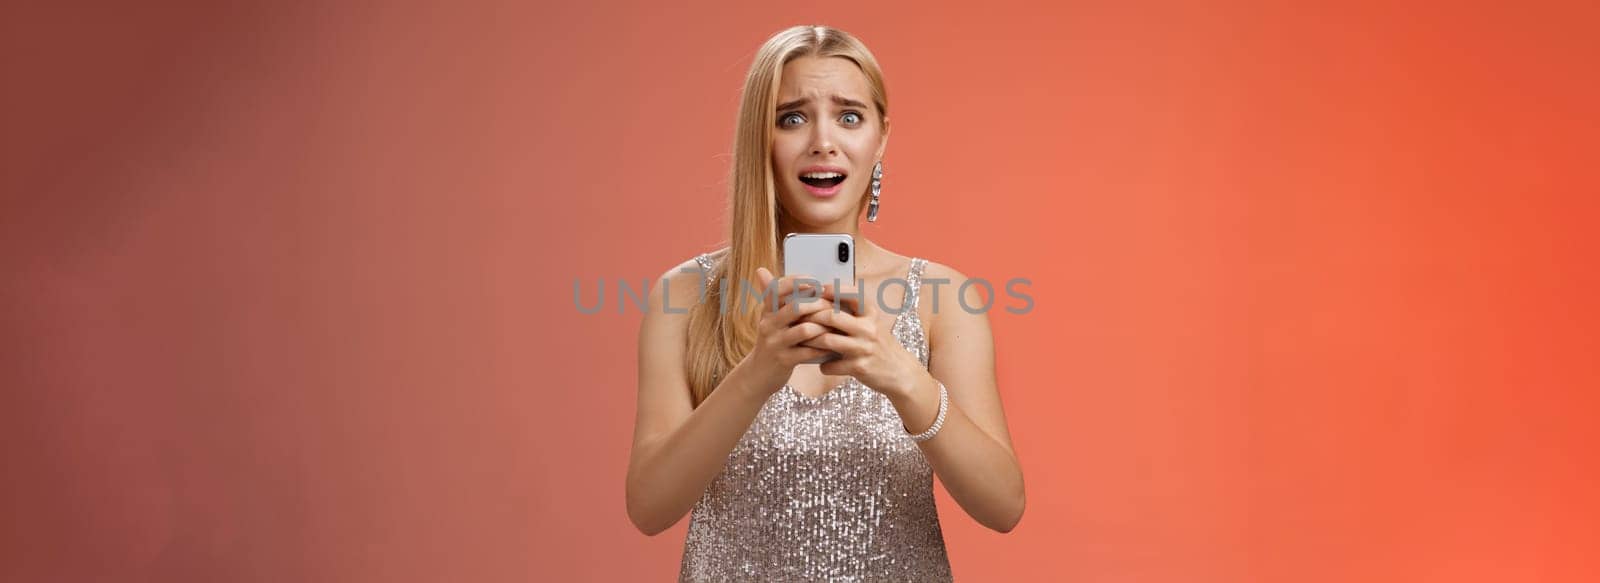 Panicking shocked woman concerned photos leaked internet look afraid anxious widen eyes cringing troubled hold smartphone shook speechless gasping terrified friends find out secret, red background.